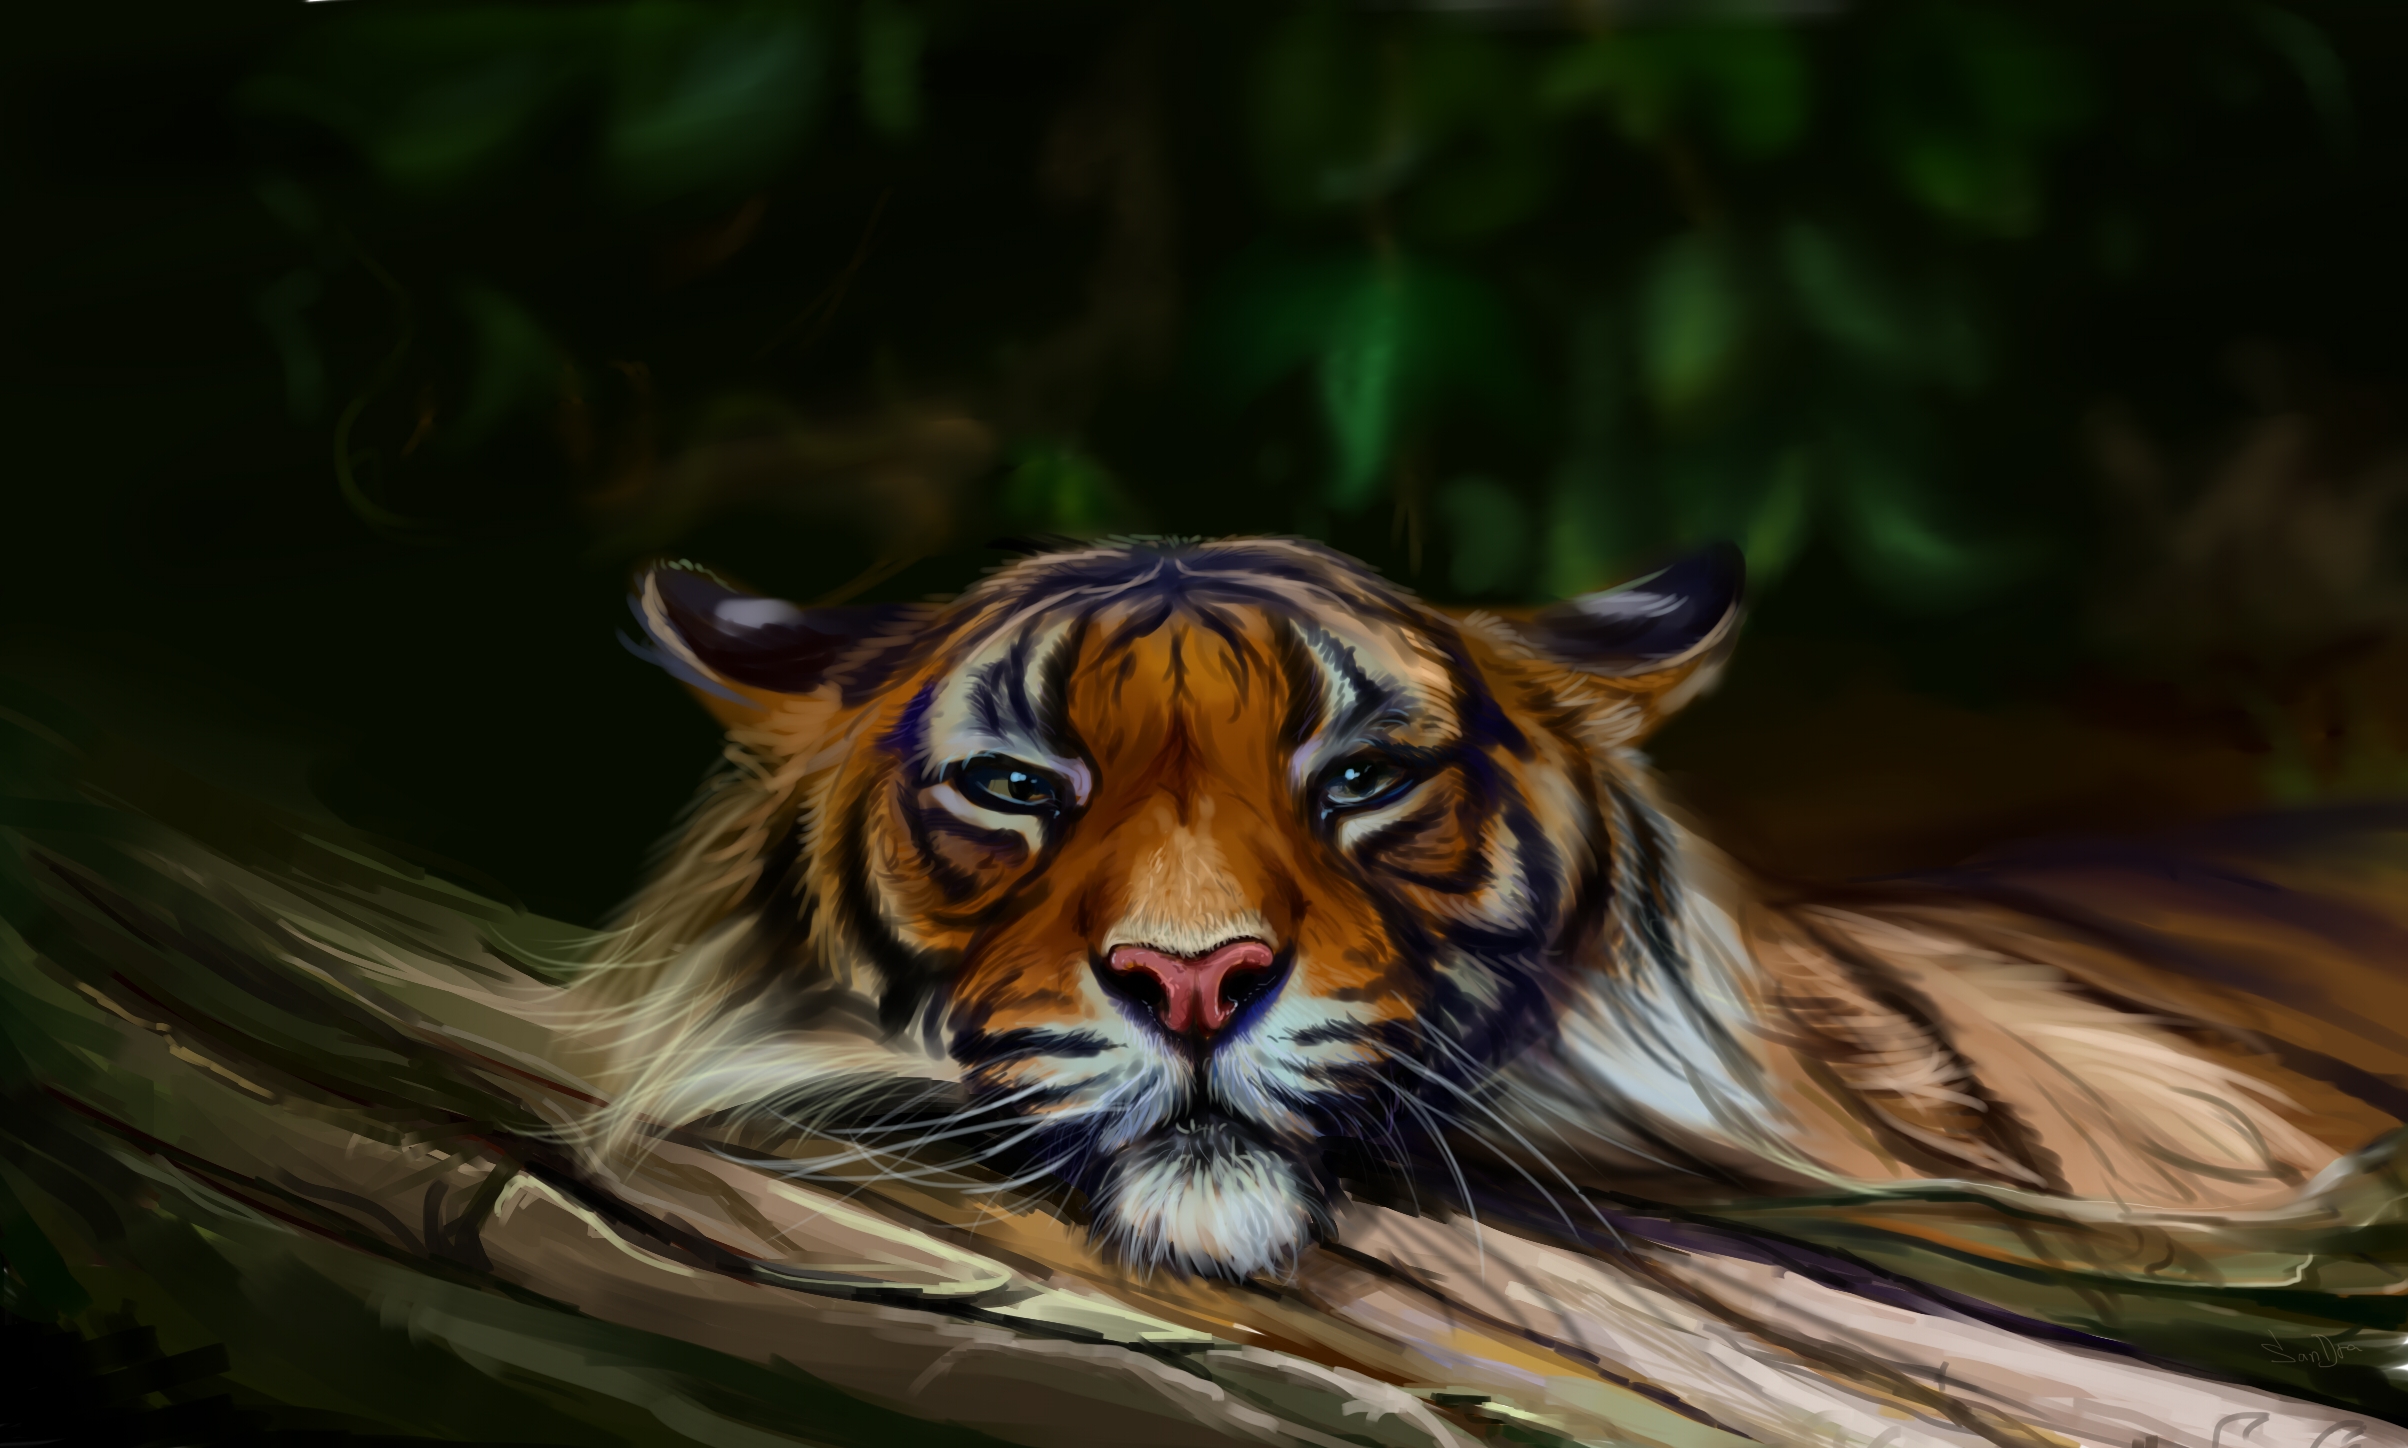 Wallpapers tiger muzzle art on the desktop